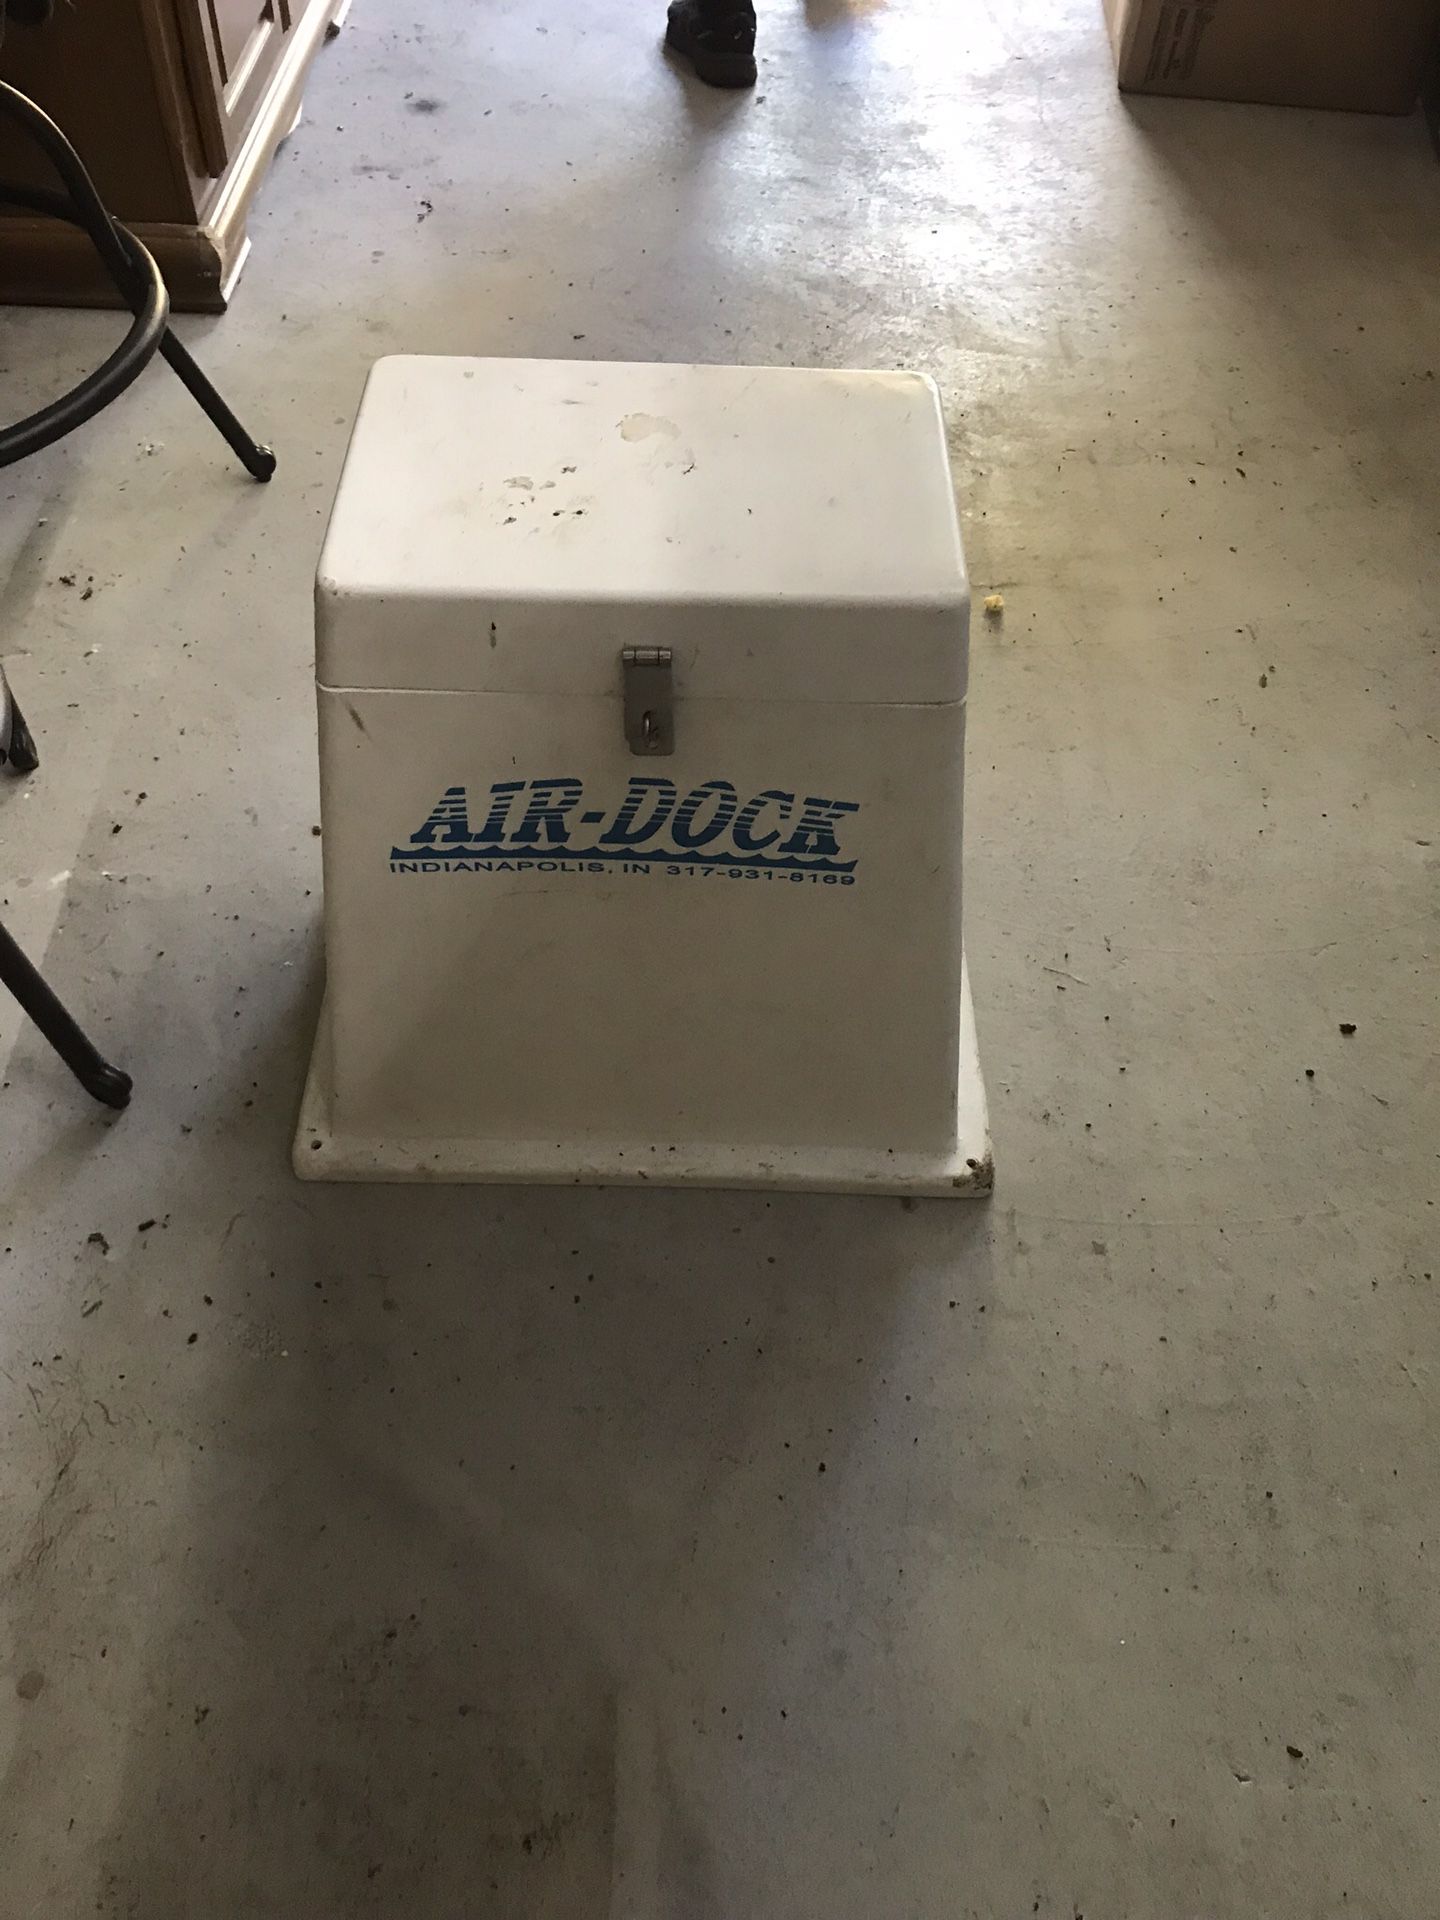 Air Dock Inflation Device